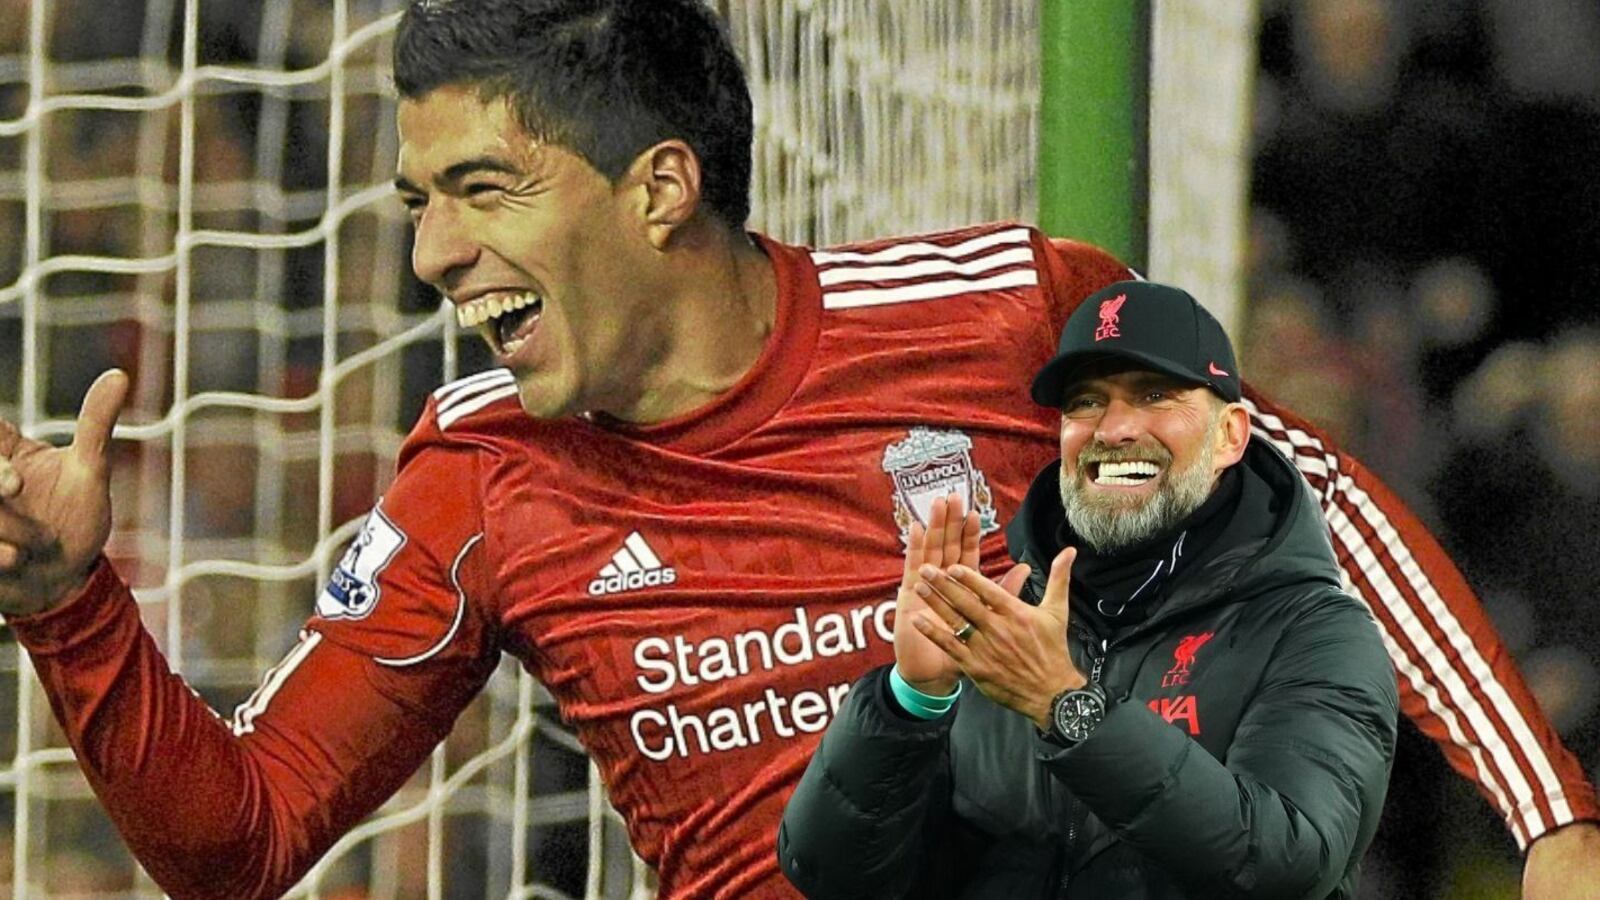 He is called the new Luis Suarez, now he is showing off why he deserves the nickname